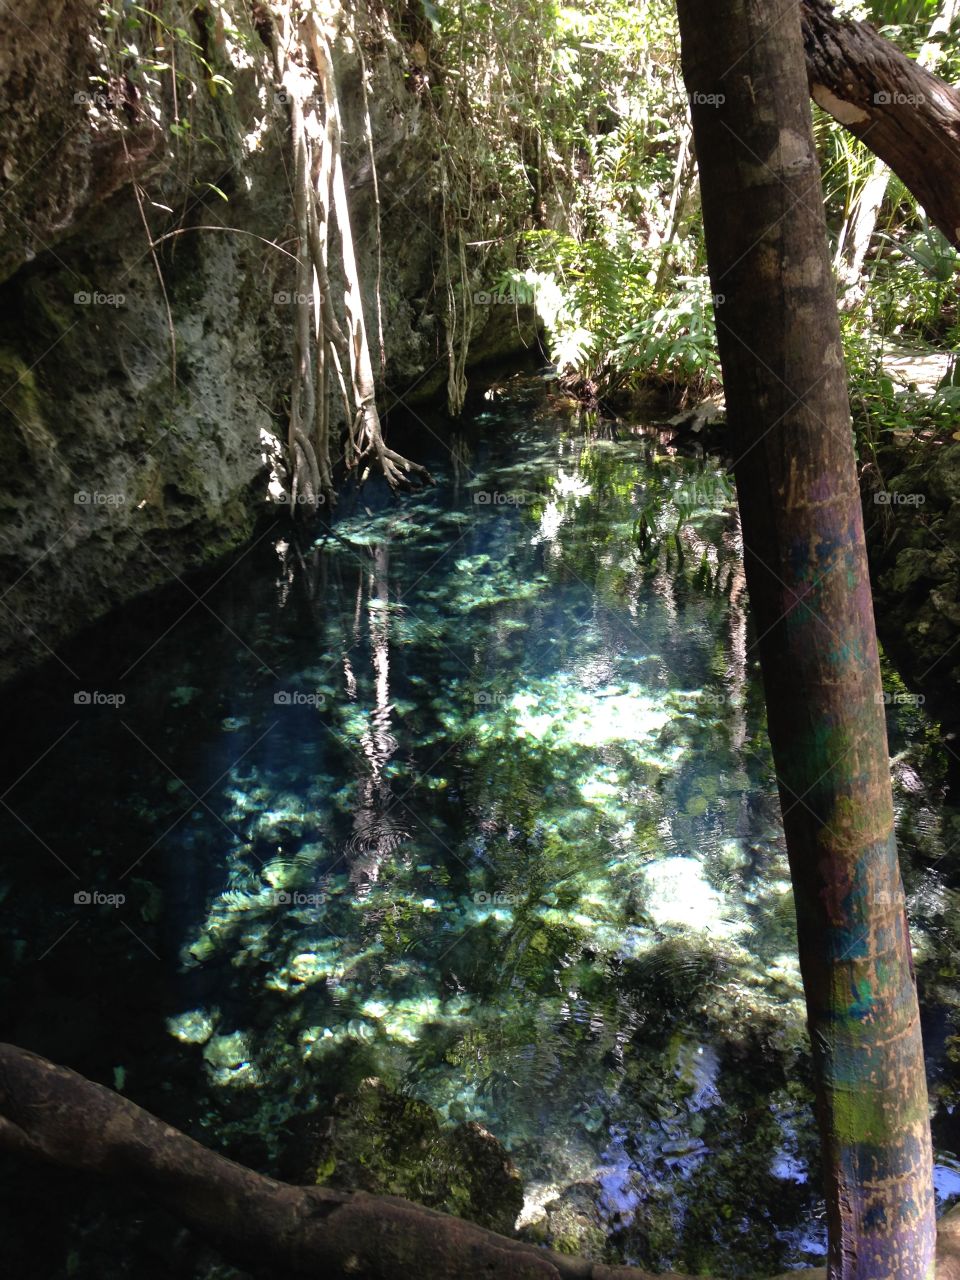 Lake, water, cenote, jungle, vacations, hollidays, mexico, cenote sacbe, nature, eco, tourism, leafs, branches reflection, clear, green, aquamarine